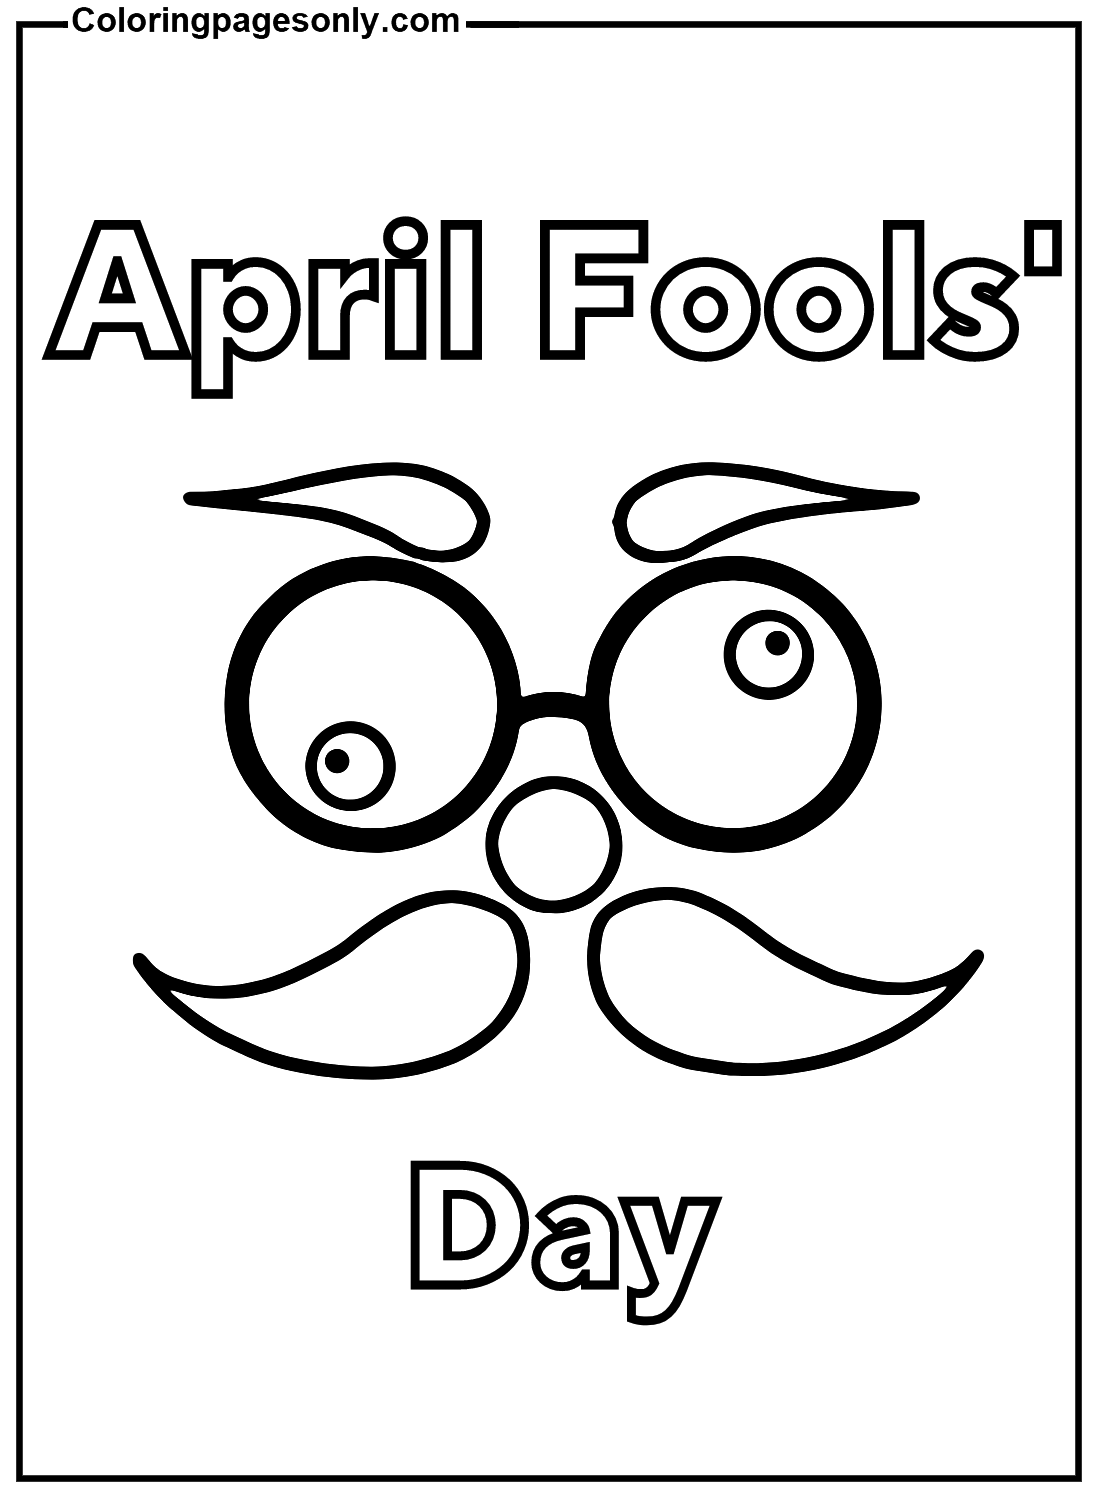 printable-april-fools-day-coloring-page-free-printable-coloring-pages